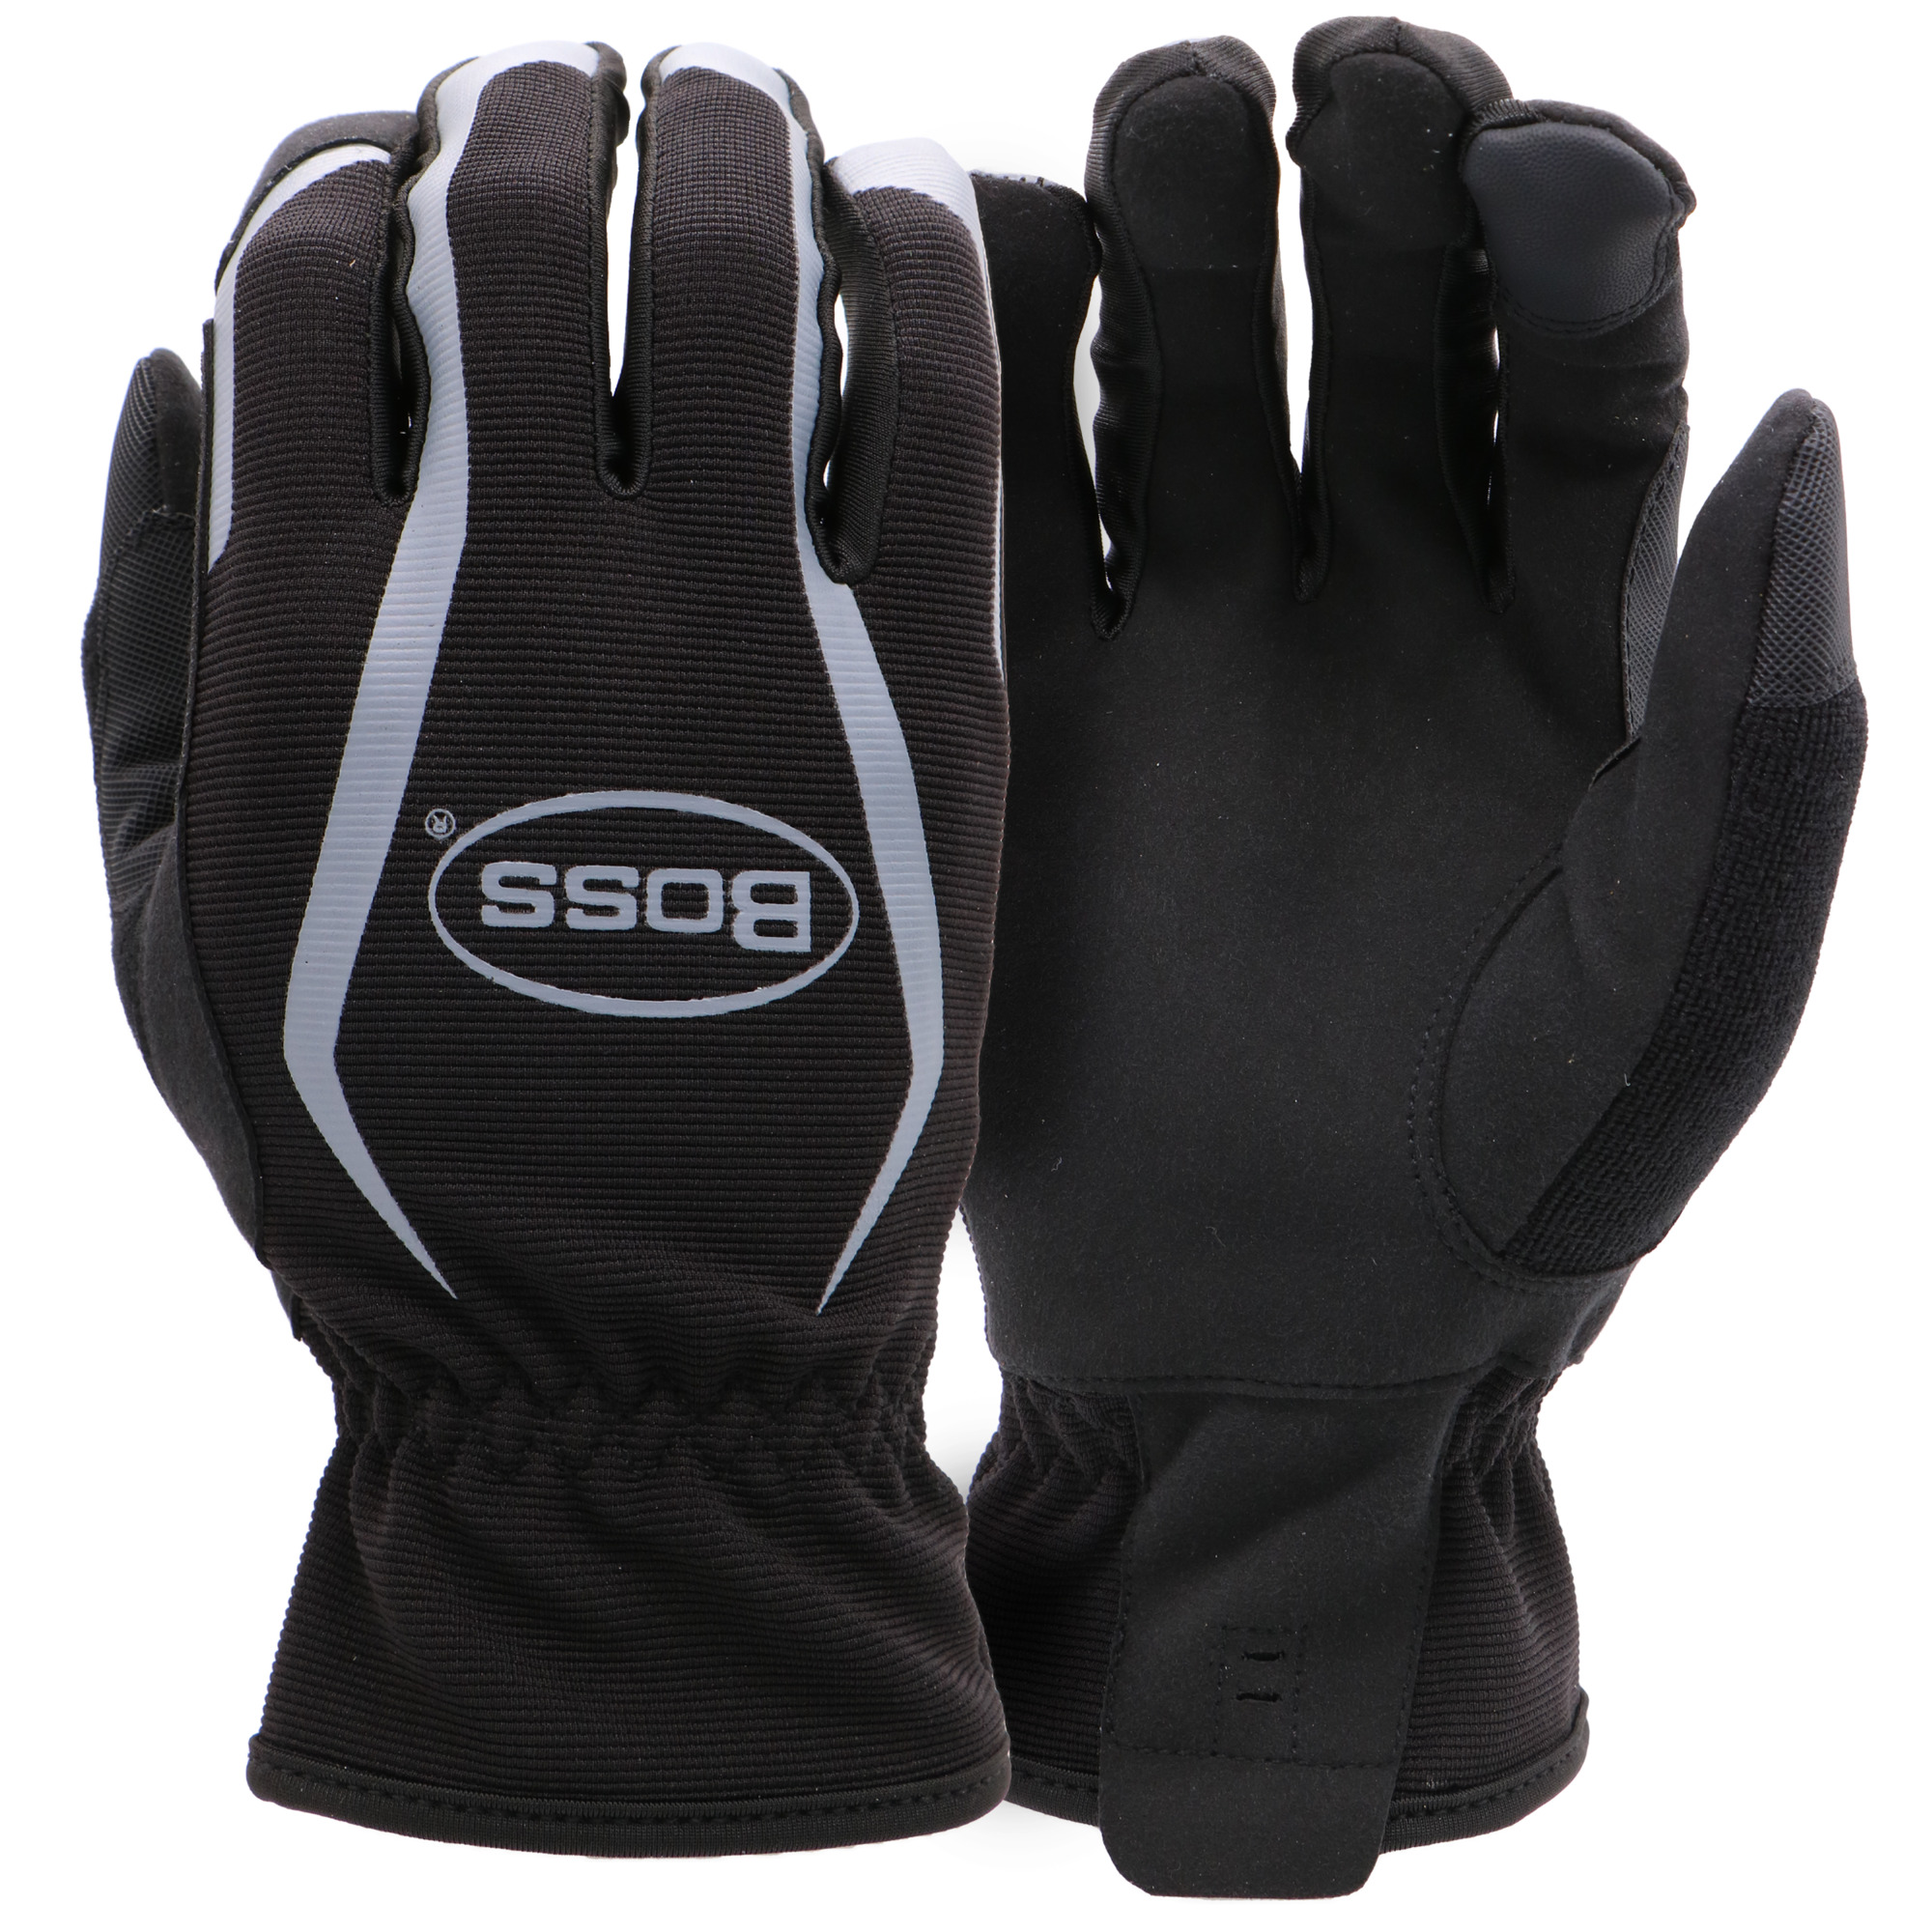 Boss, Extreme Hi Performance with synthetic leather, Size L, Color Black, Included (qty.) 1, Model B52031-L